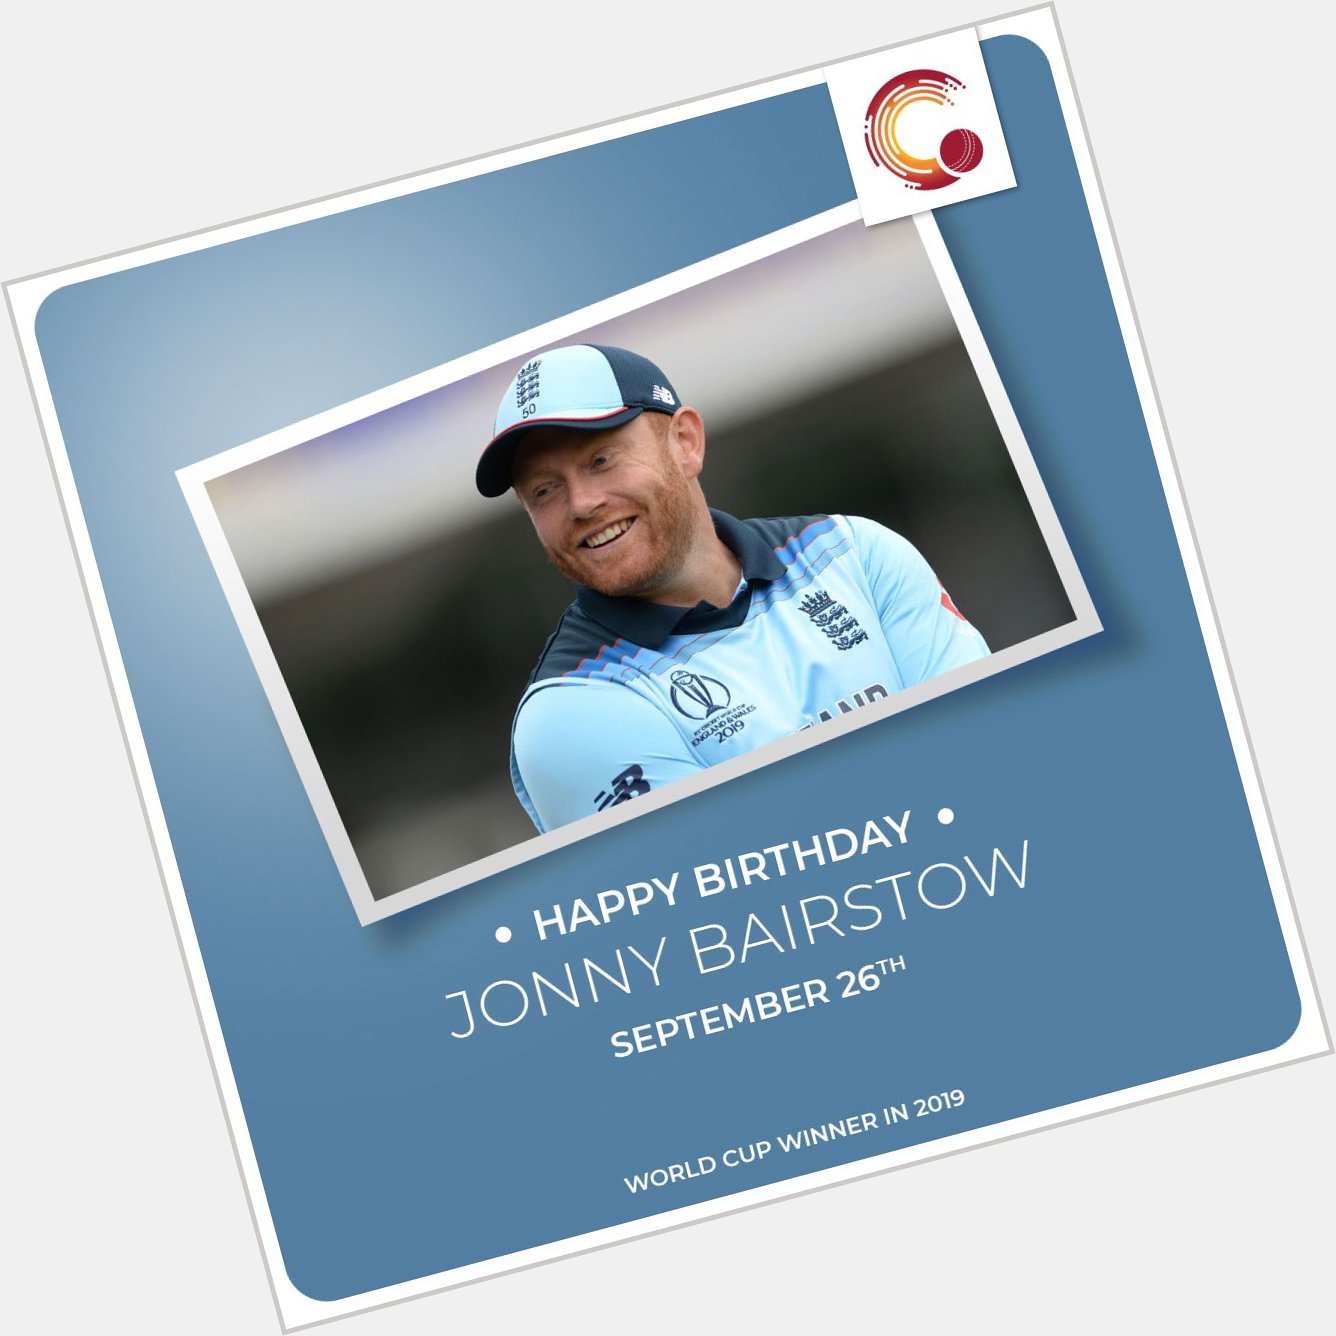 Happy Birthday, Jonny Bairstow! He was instrumental in England\s World Cup success earlier this year. 